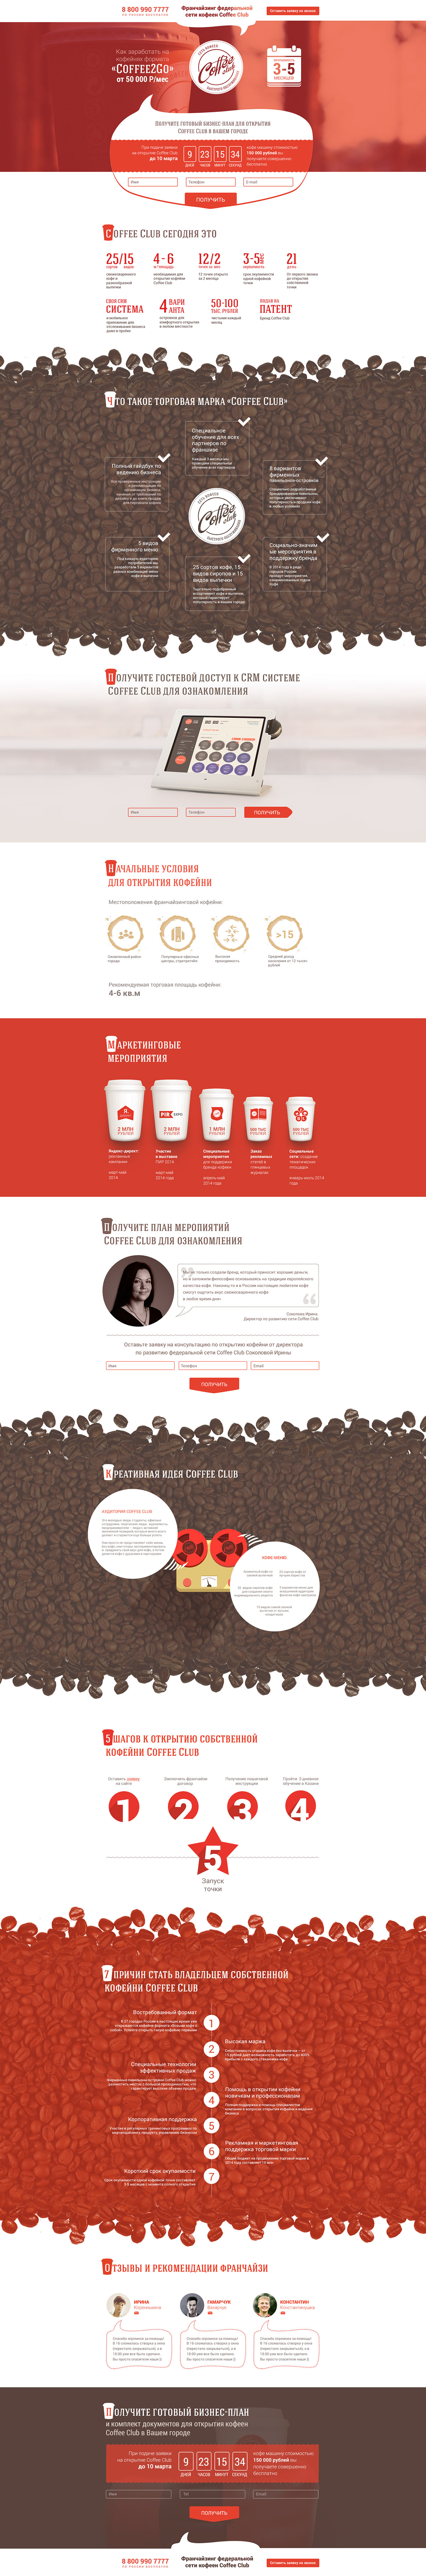 landing page Coffee one page site red brown